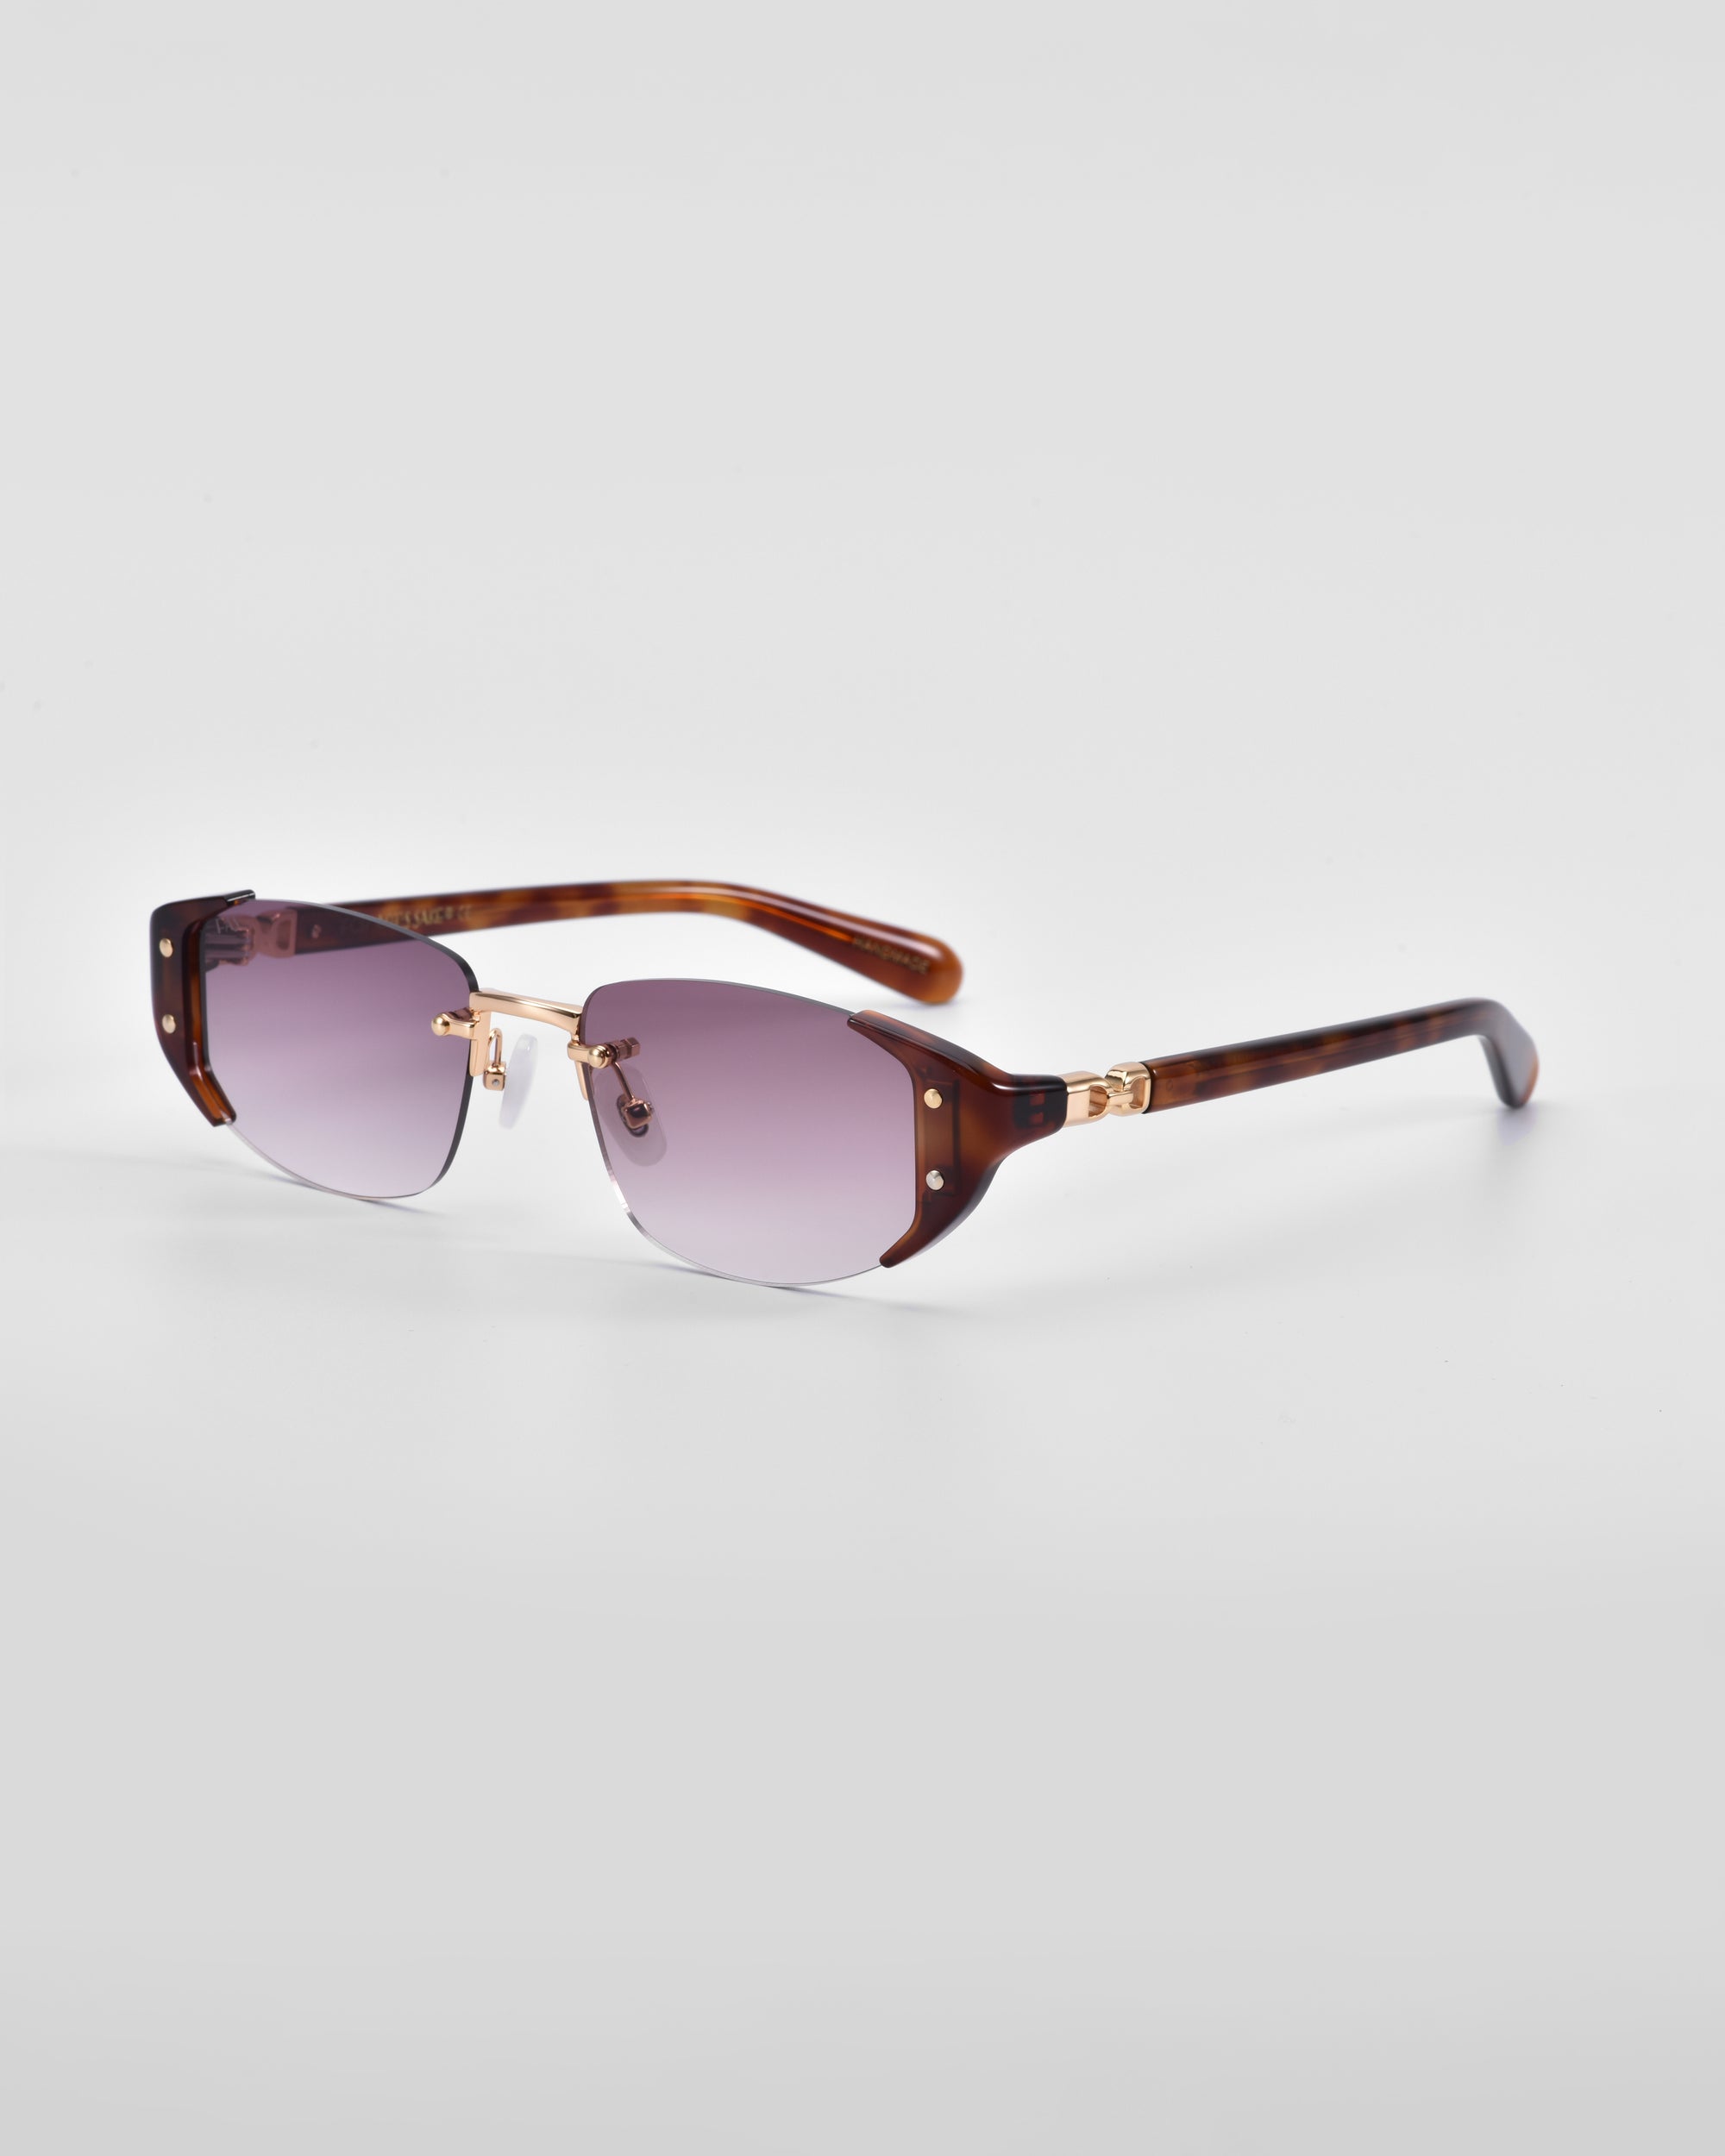 The For Art's Sake® Harbour sunglasses boast a retro-inspired design with gradient lenses shading from purple to clear. The tortoiseshell-patterned frames feature 18 karat gold plating accents, and the lenses are partially rimless with the top rim matching the tortoiseshell design. The look is both sleek and modern.